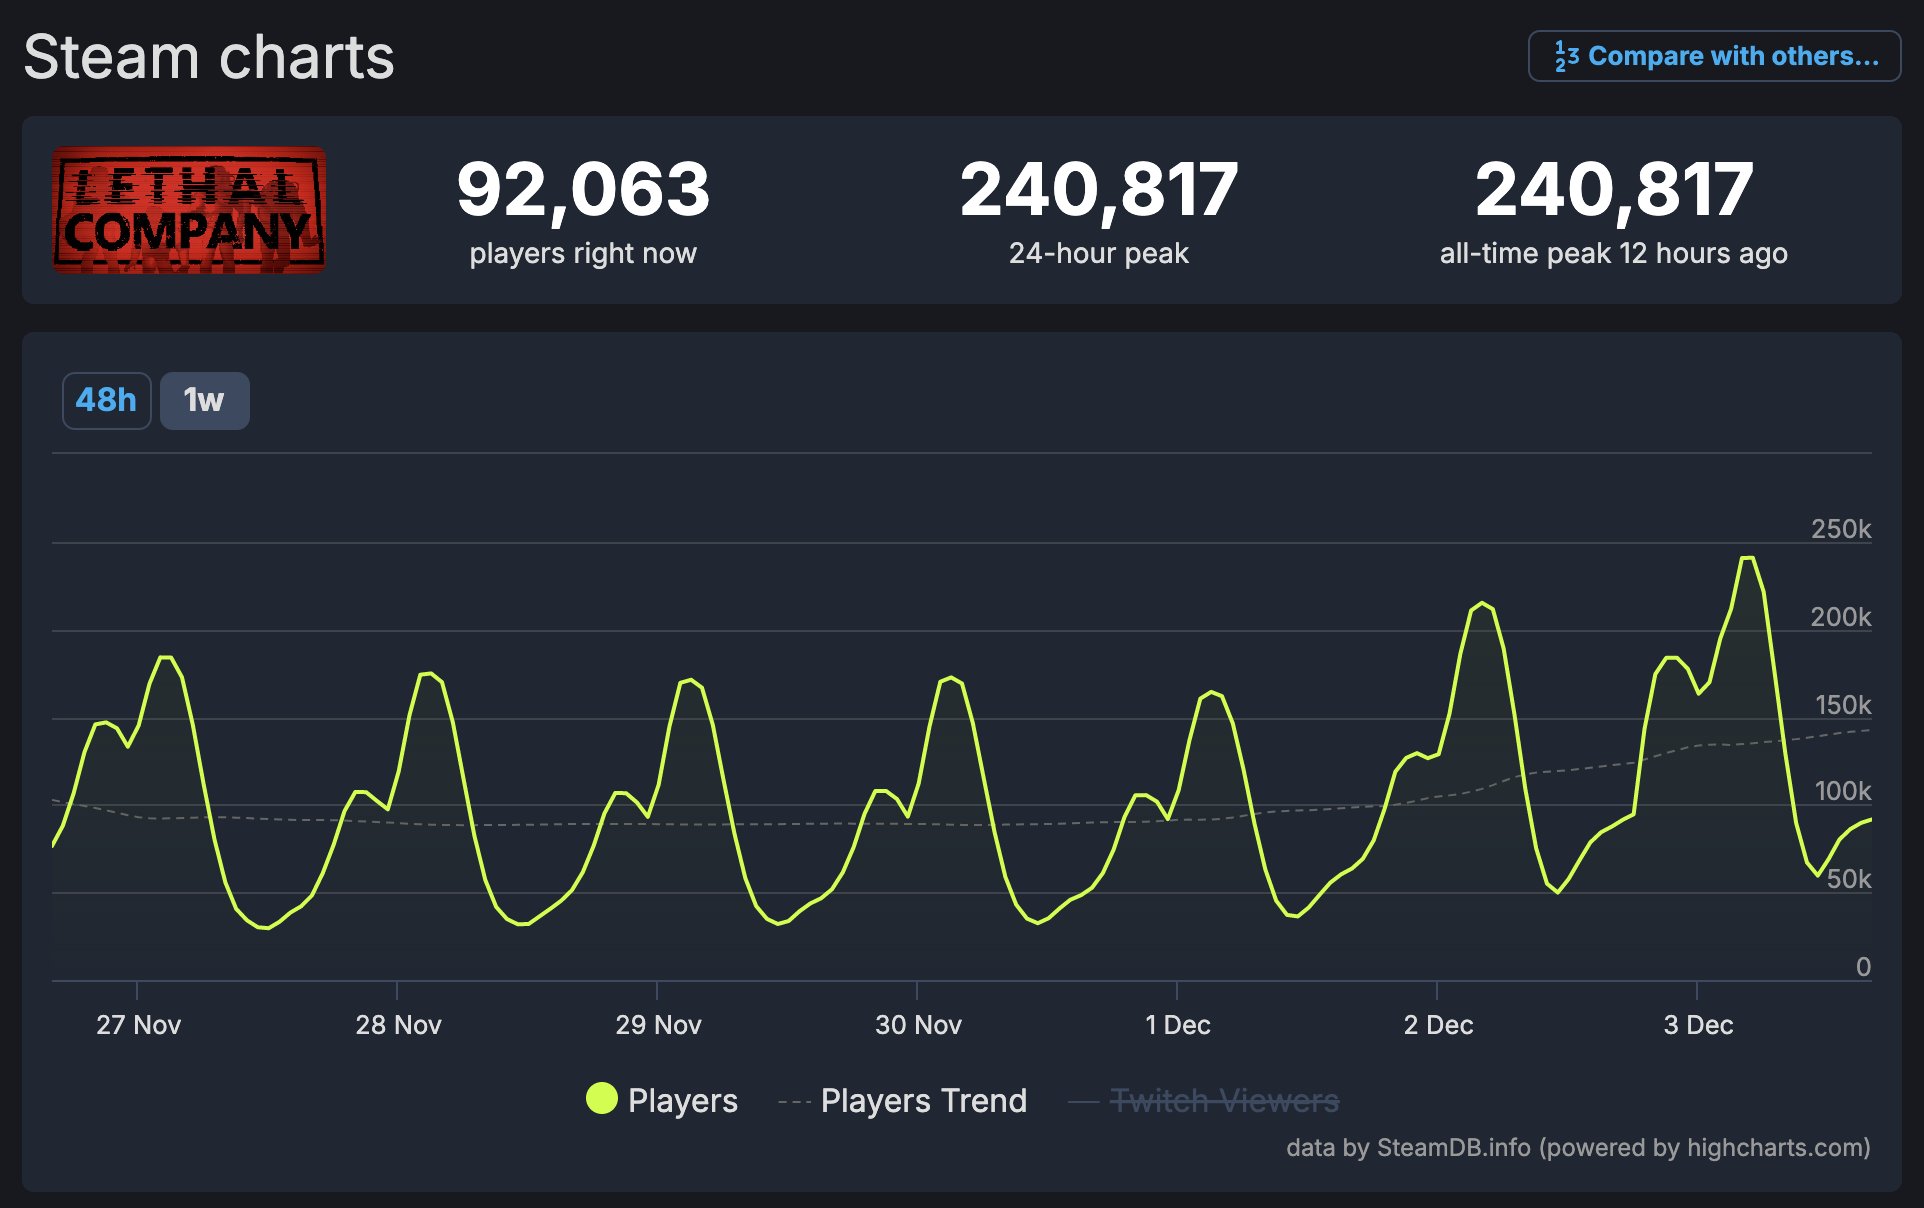 Destiny 2 Had a Peak of Over 200k Concurrent Players During its